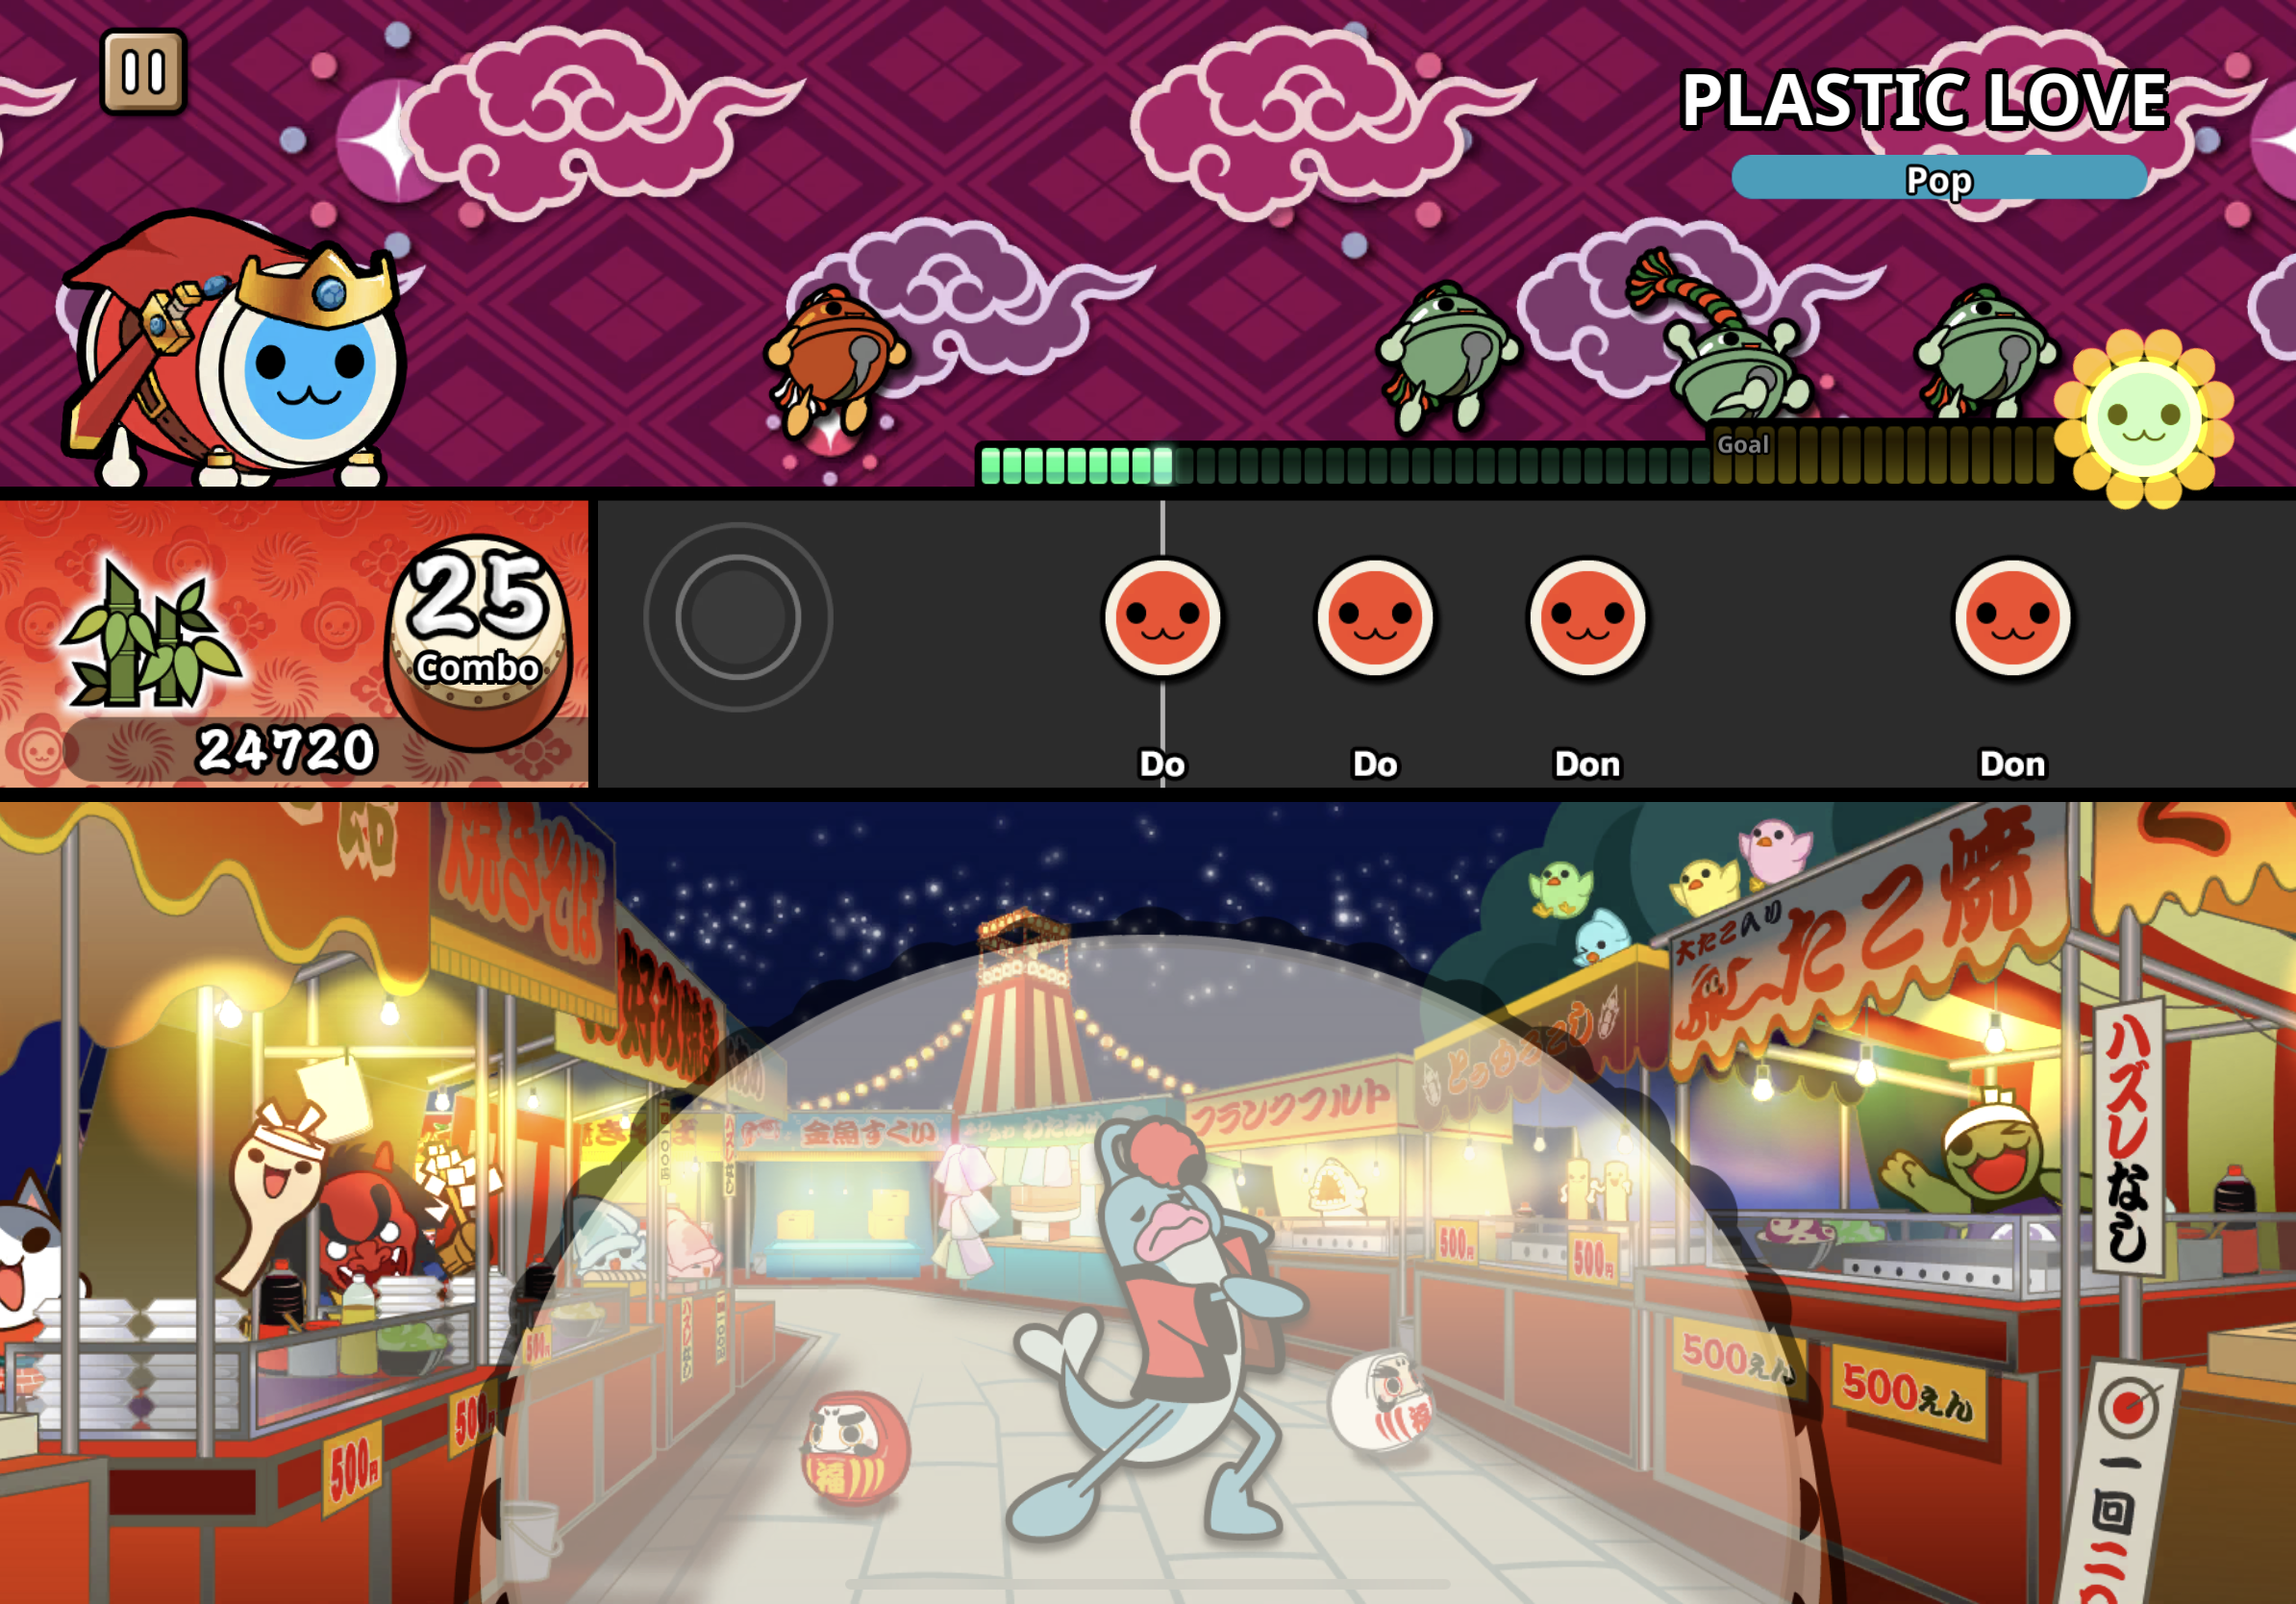 ‘Taiko No Tatsujin Pop Tap Beat’ on Apple Arcade Has Been Updated To Bring In the Legendary ‘Plastic Love’, ‘Battaille Decisive’ From Evangelion, and More